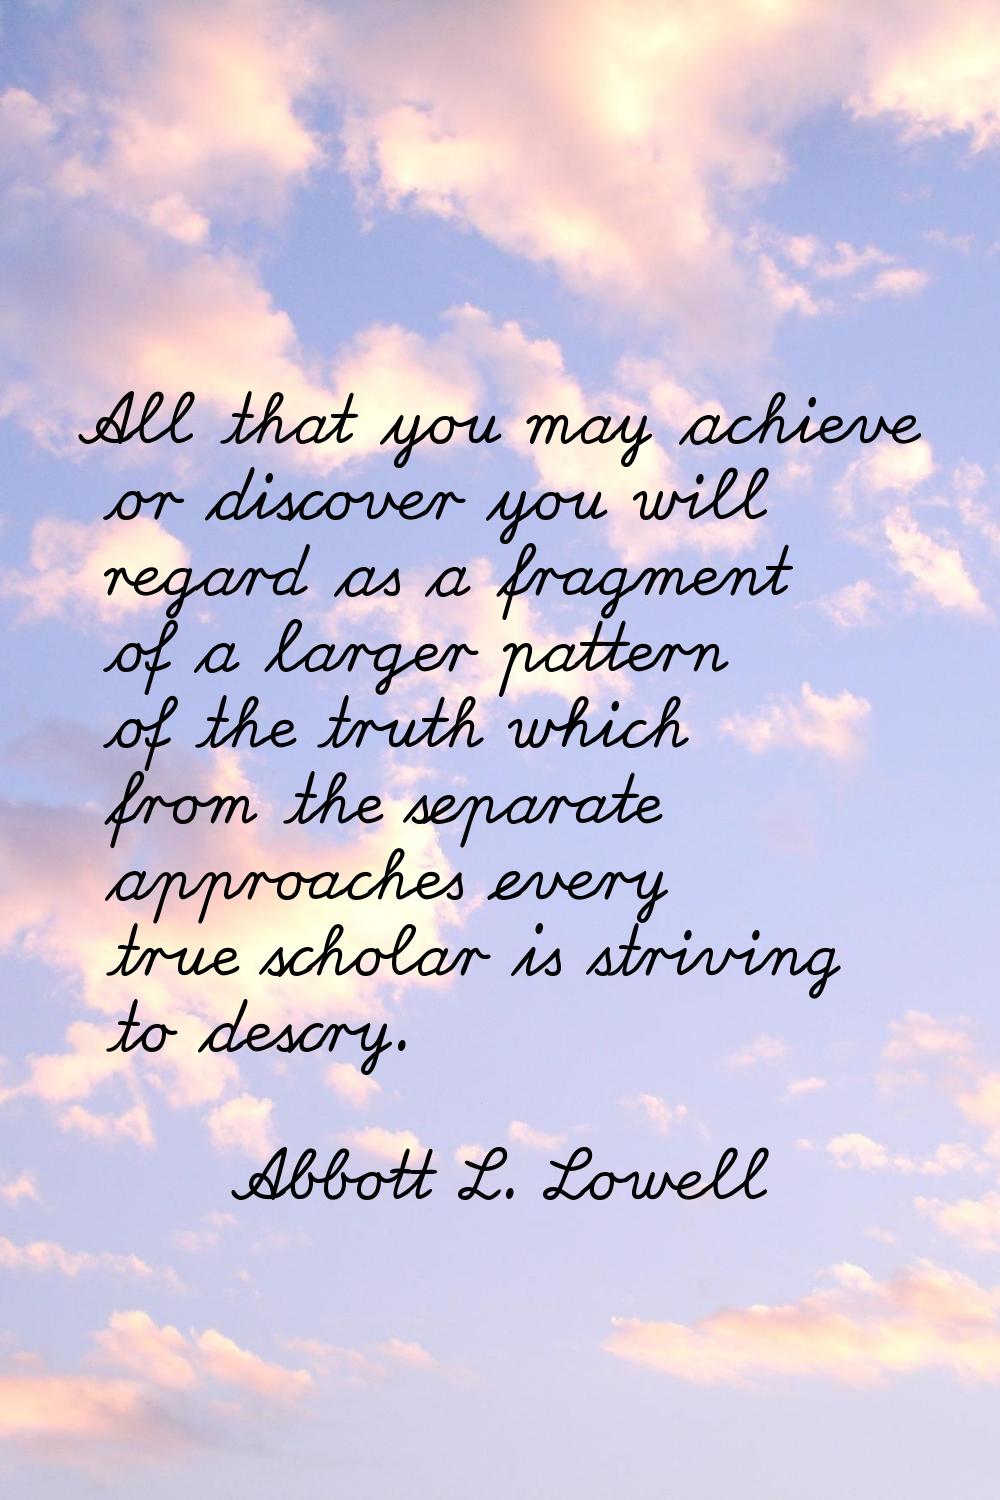 All that you may achieve or discover you will regard as a fragment of a larger pattern of the truth